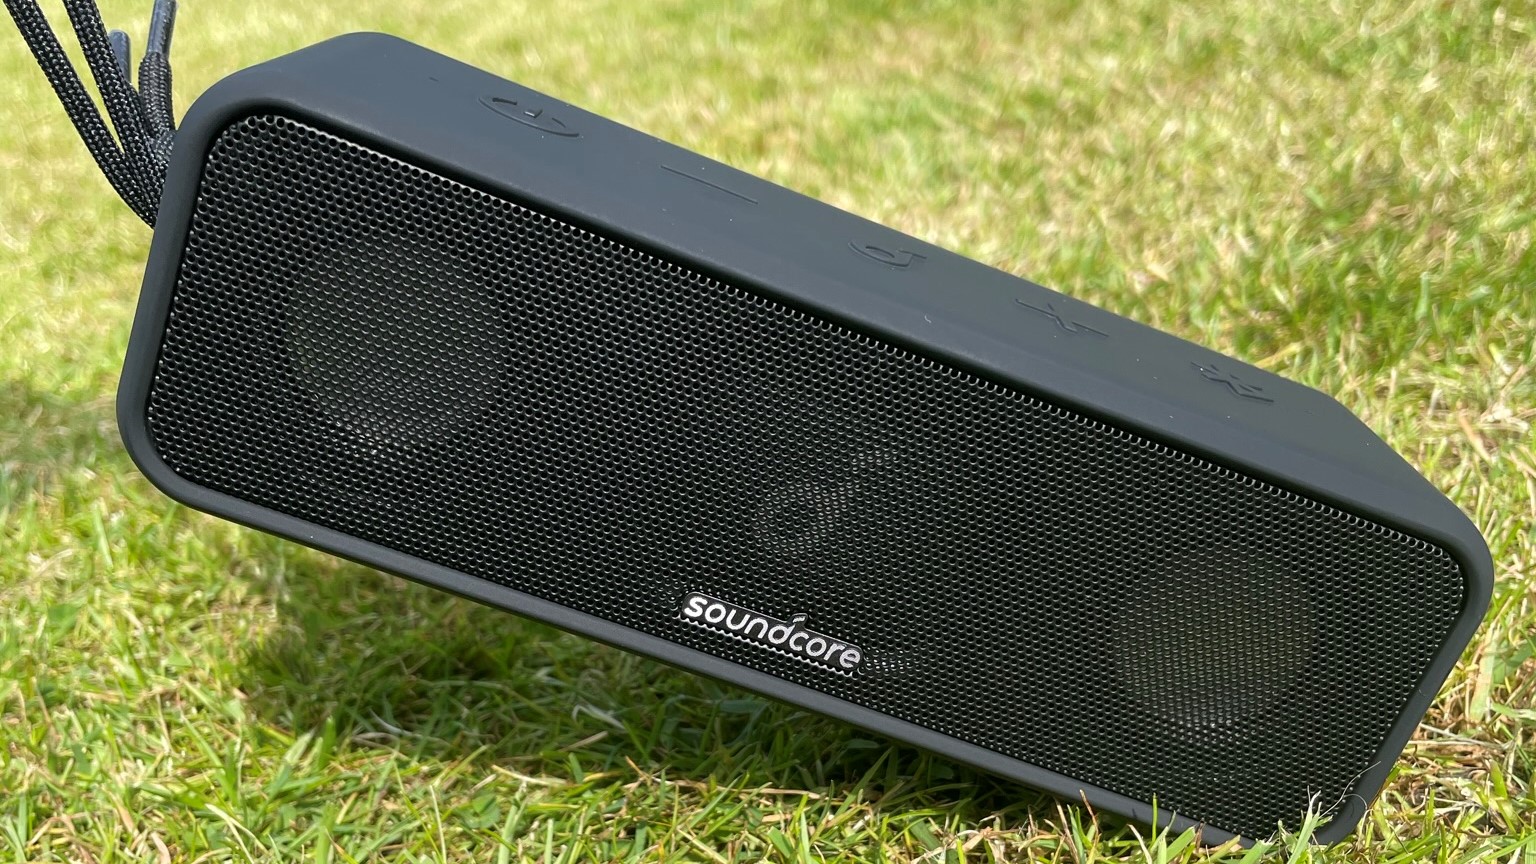 Portable speaker outside on grass being pulled up by strap on left side